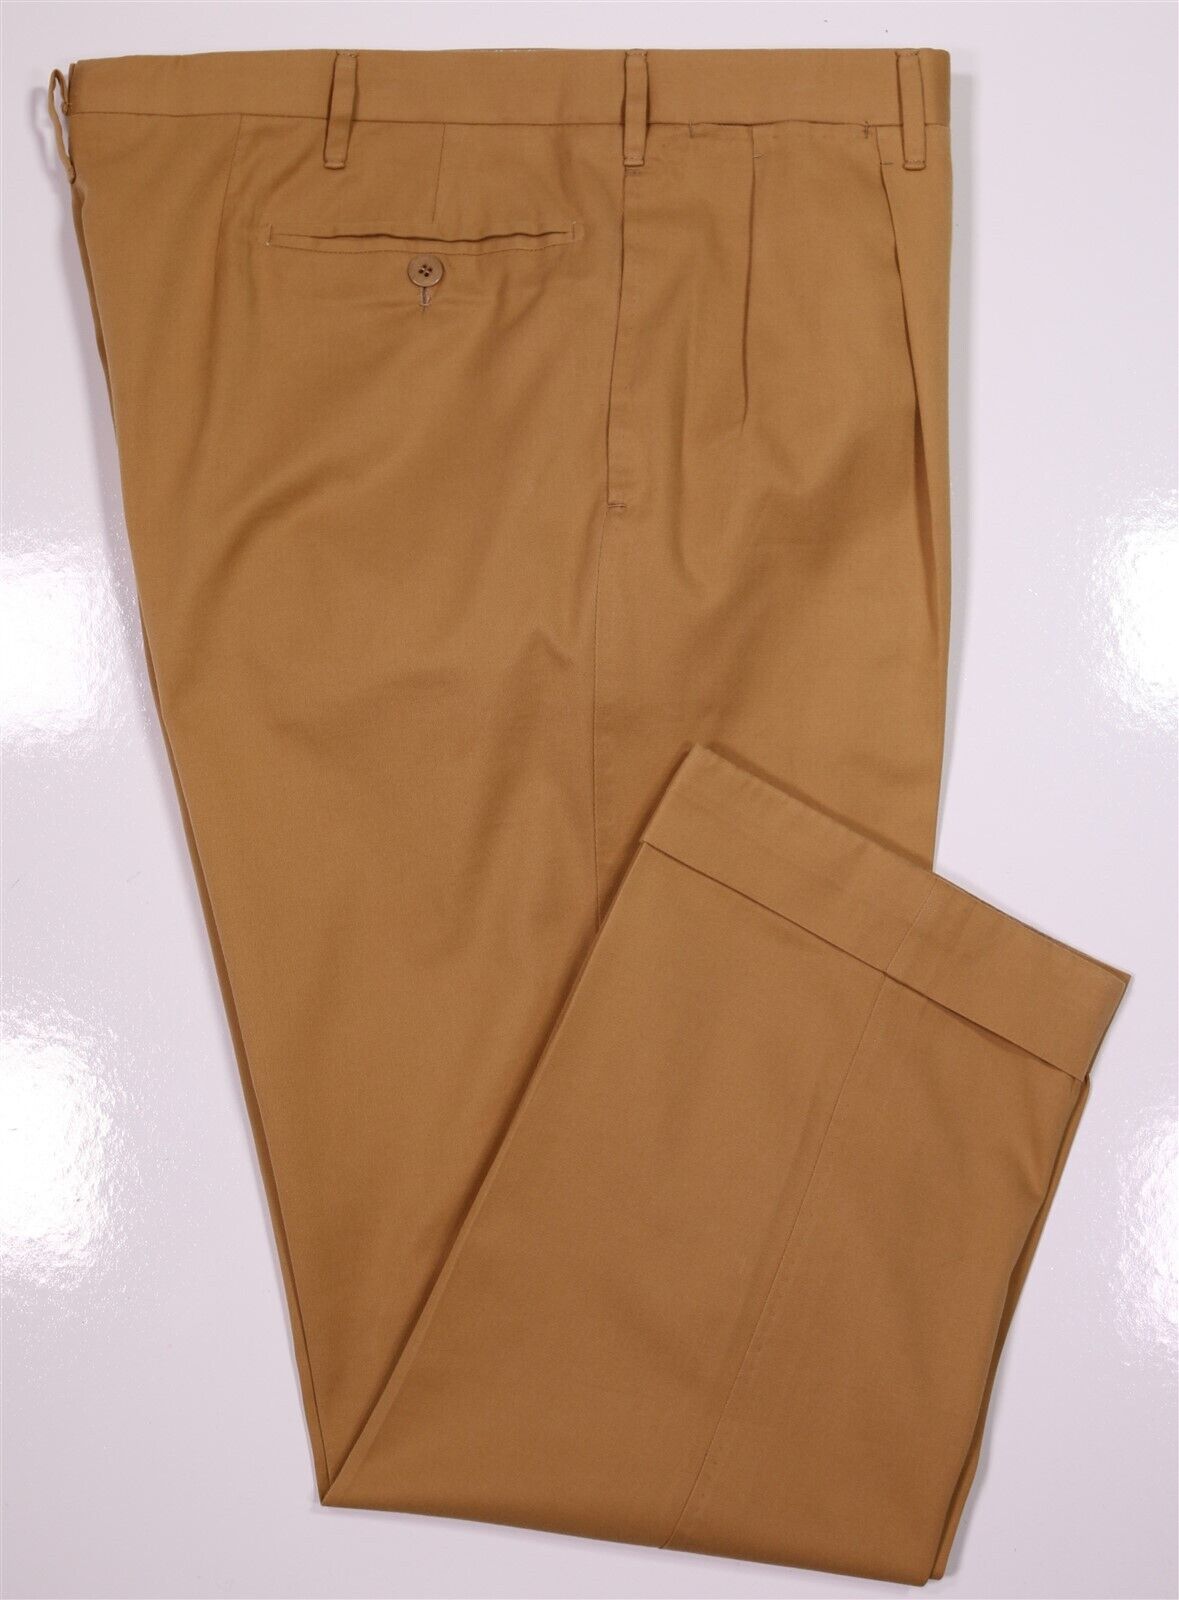 Gianni Campagna Milano Bespoke Light Brown 150s Cotton Pleated Dress Pants 36x28